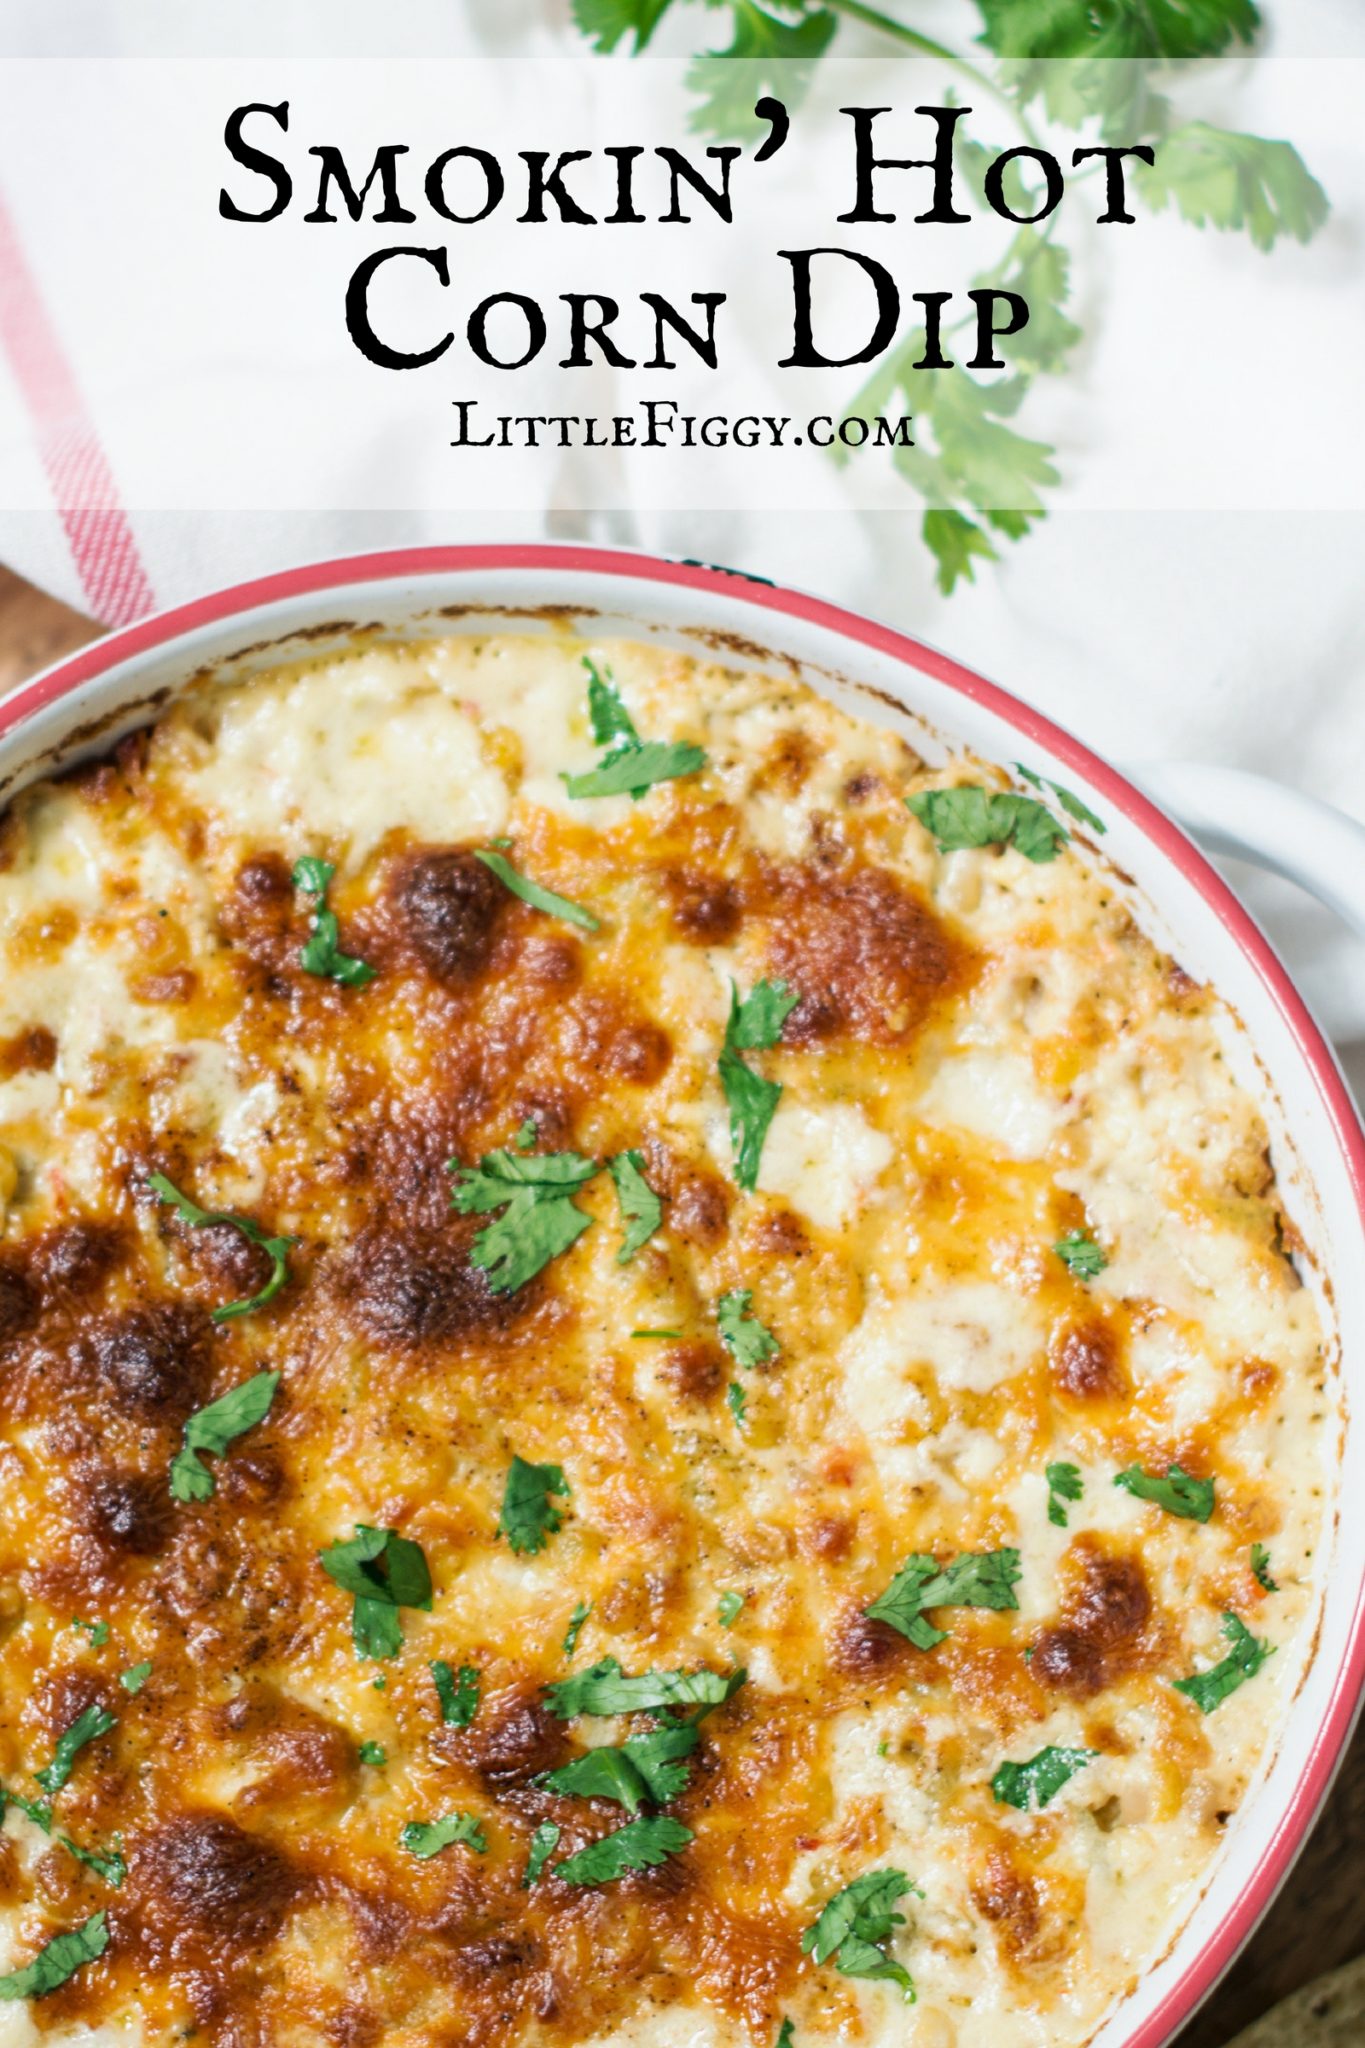 Make up this hot and cheesy Corn Dip recipe to share with friends and family! Great for parties, BBQs or any get together! Recipe from Little Figgy Food